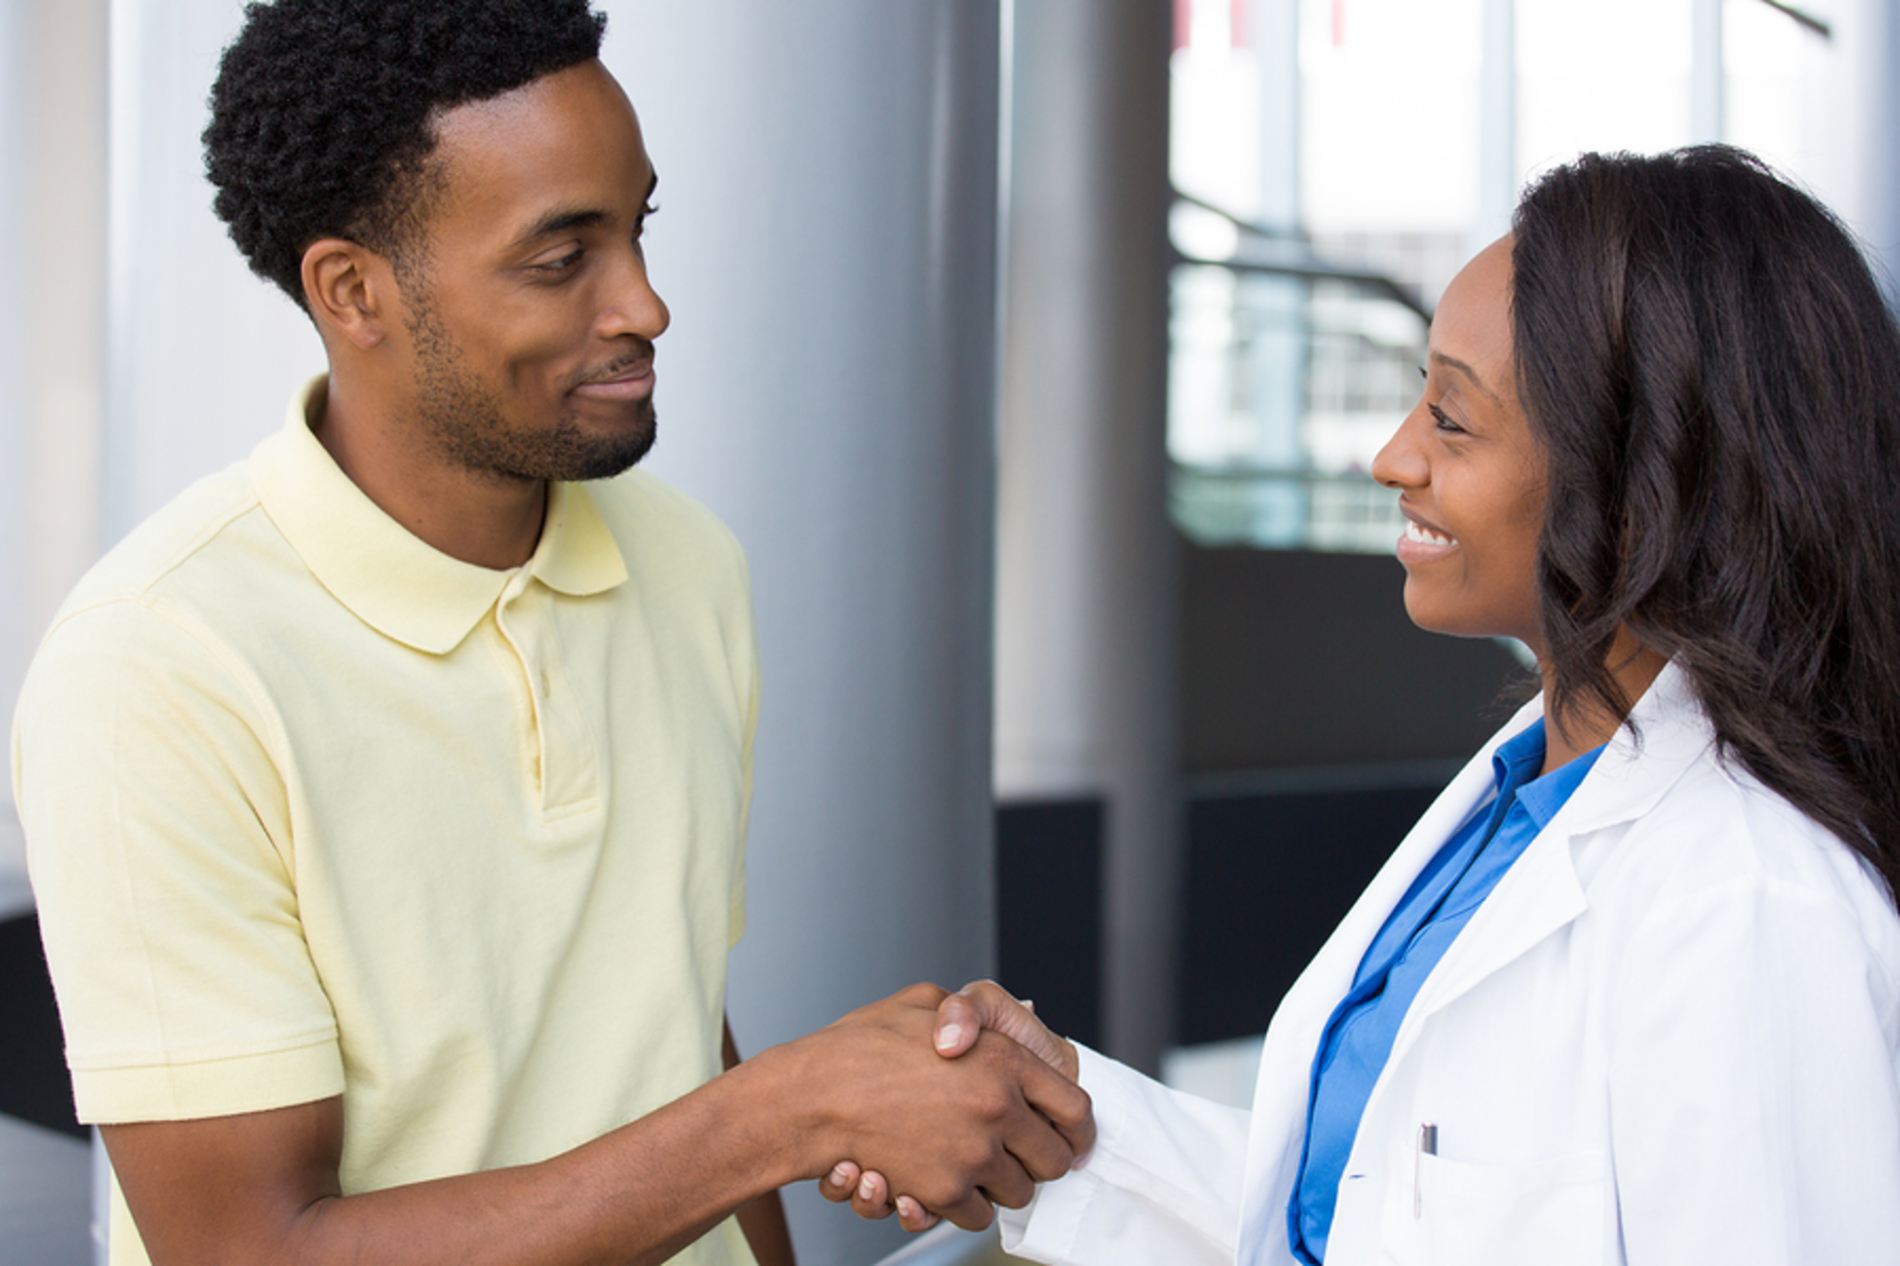 Medical doctor shaking the hand of a patient.